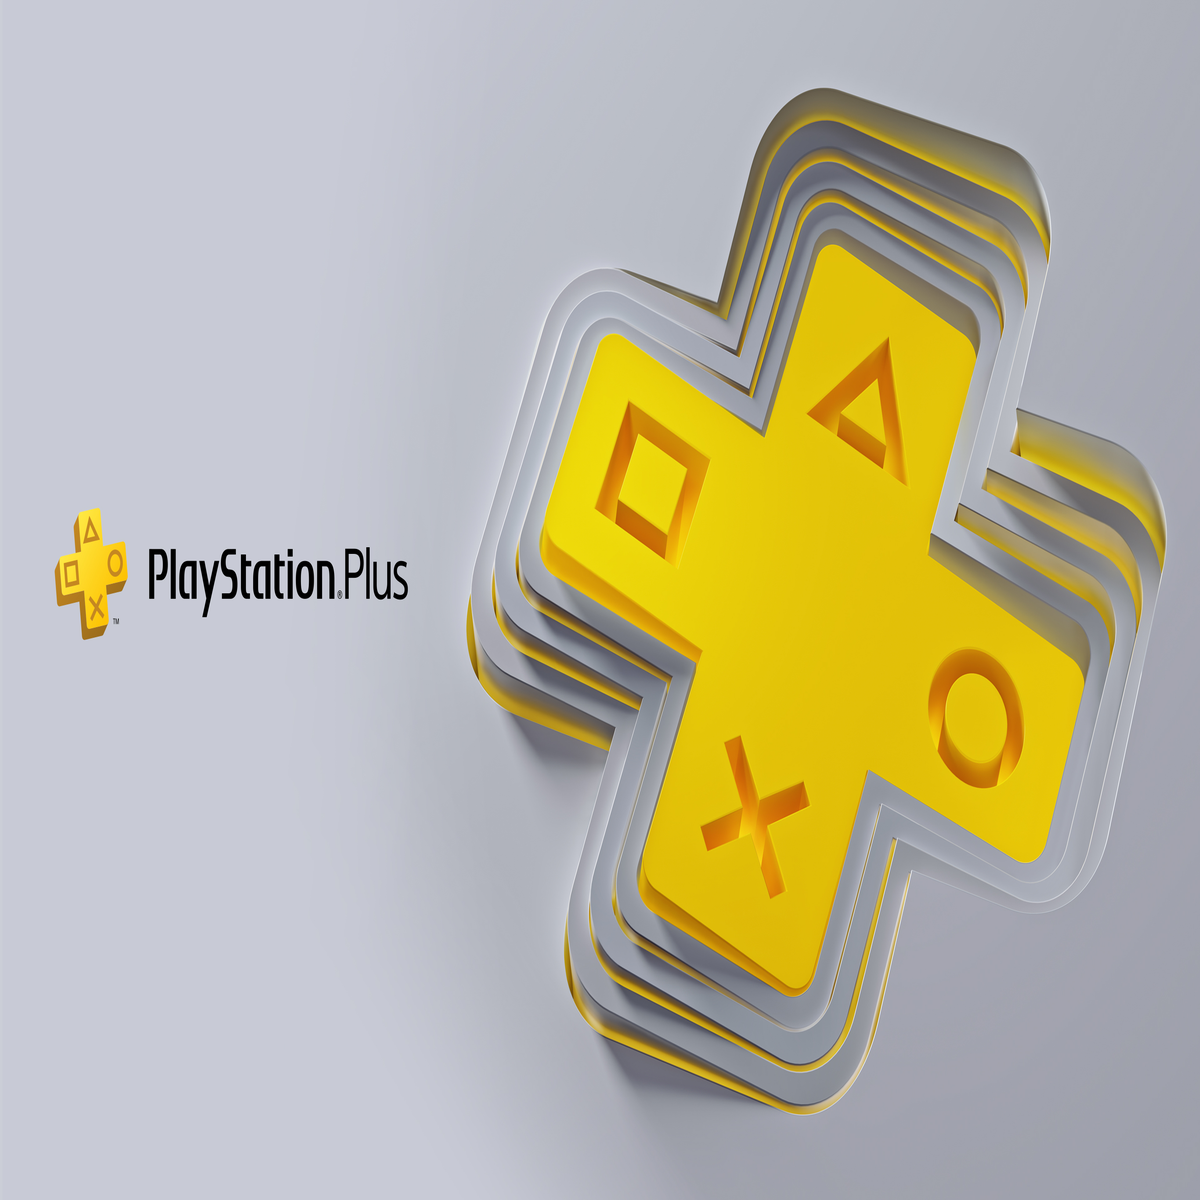 PlayStation Plus announces price increases coming later this year